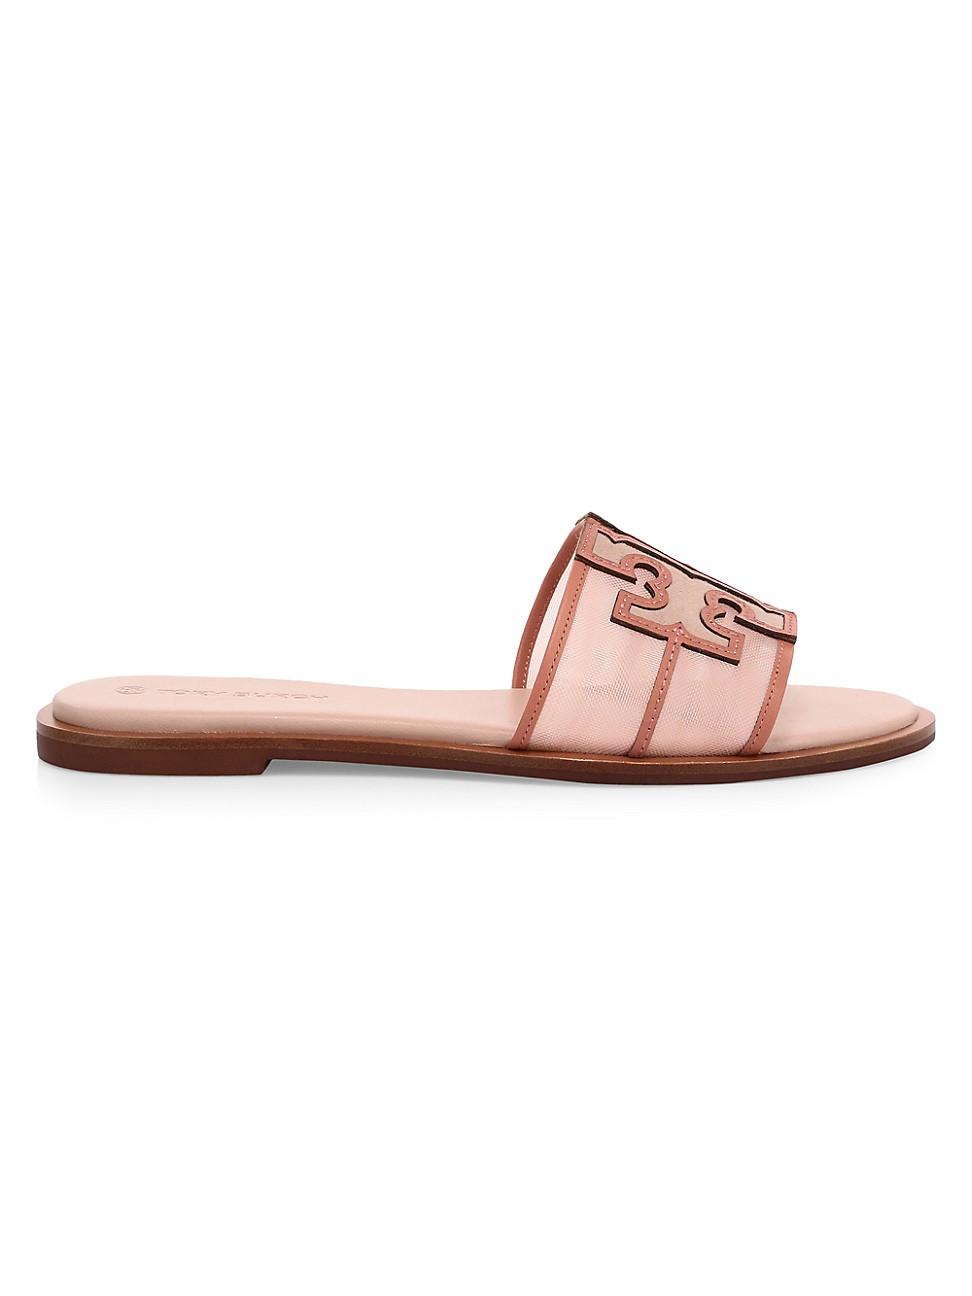 Tory Burch Ines Flat Mesh Sandals in Pink | Lyst